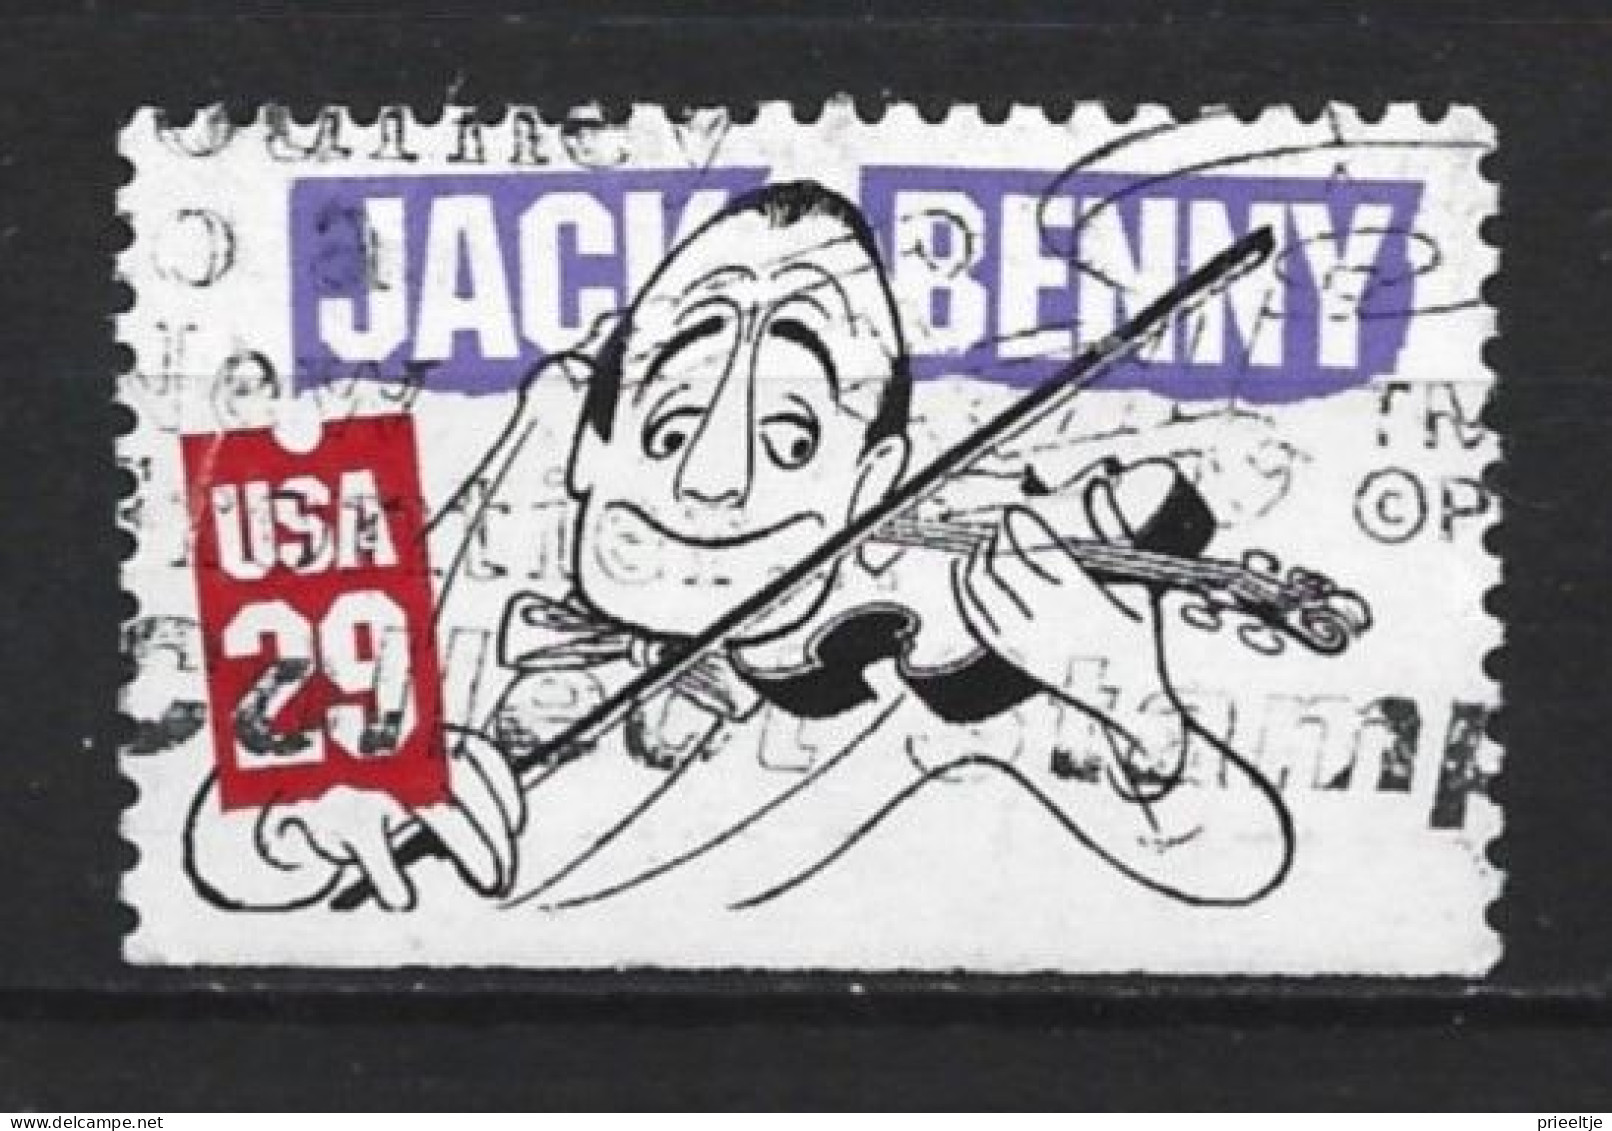 U.S.A. 1991  J. Benny  Y.T. 1969  (0) - Used Stamps